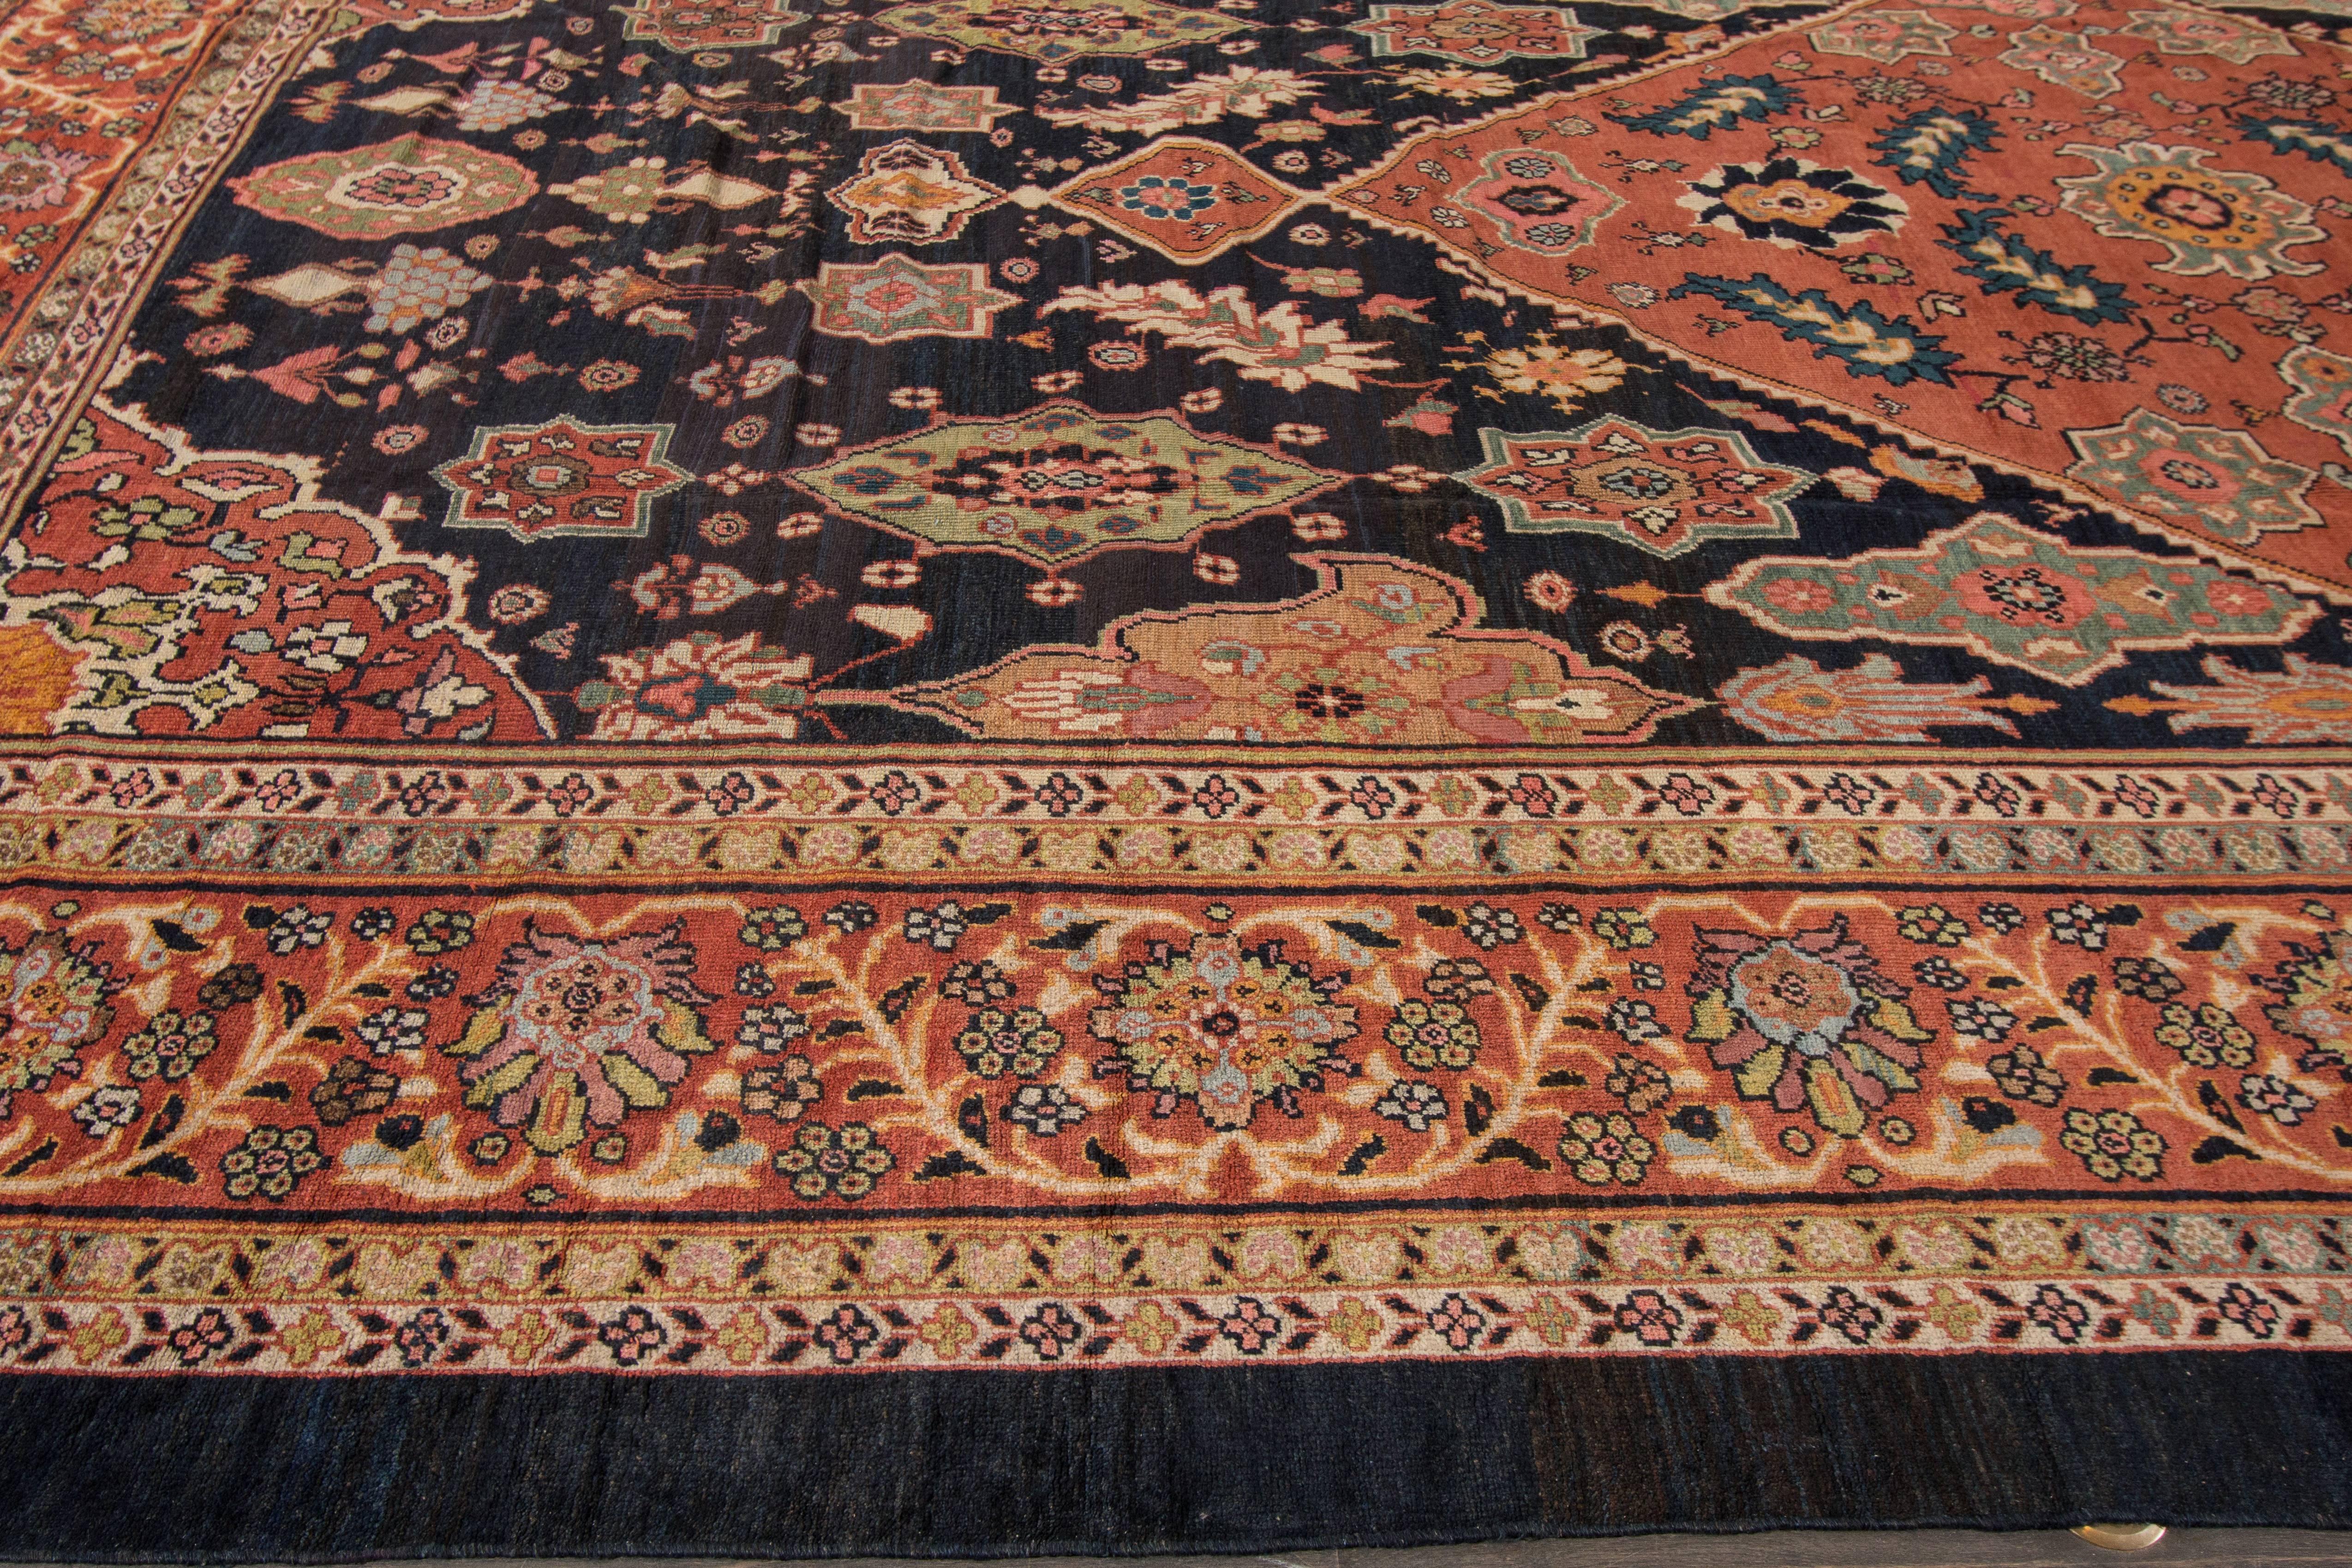 Measures: 12' x 21'.2
This beautiful hand-knotted design rug will make your floor look splendid. This collection is made in wool.